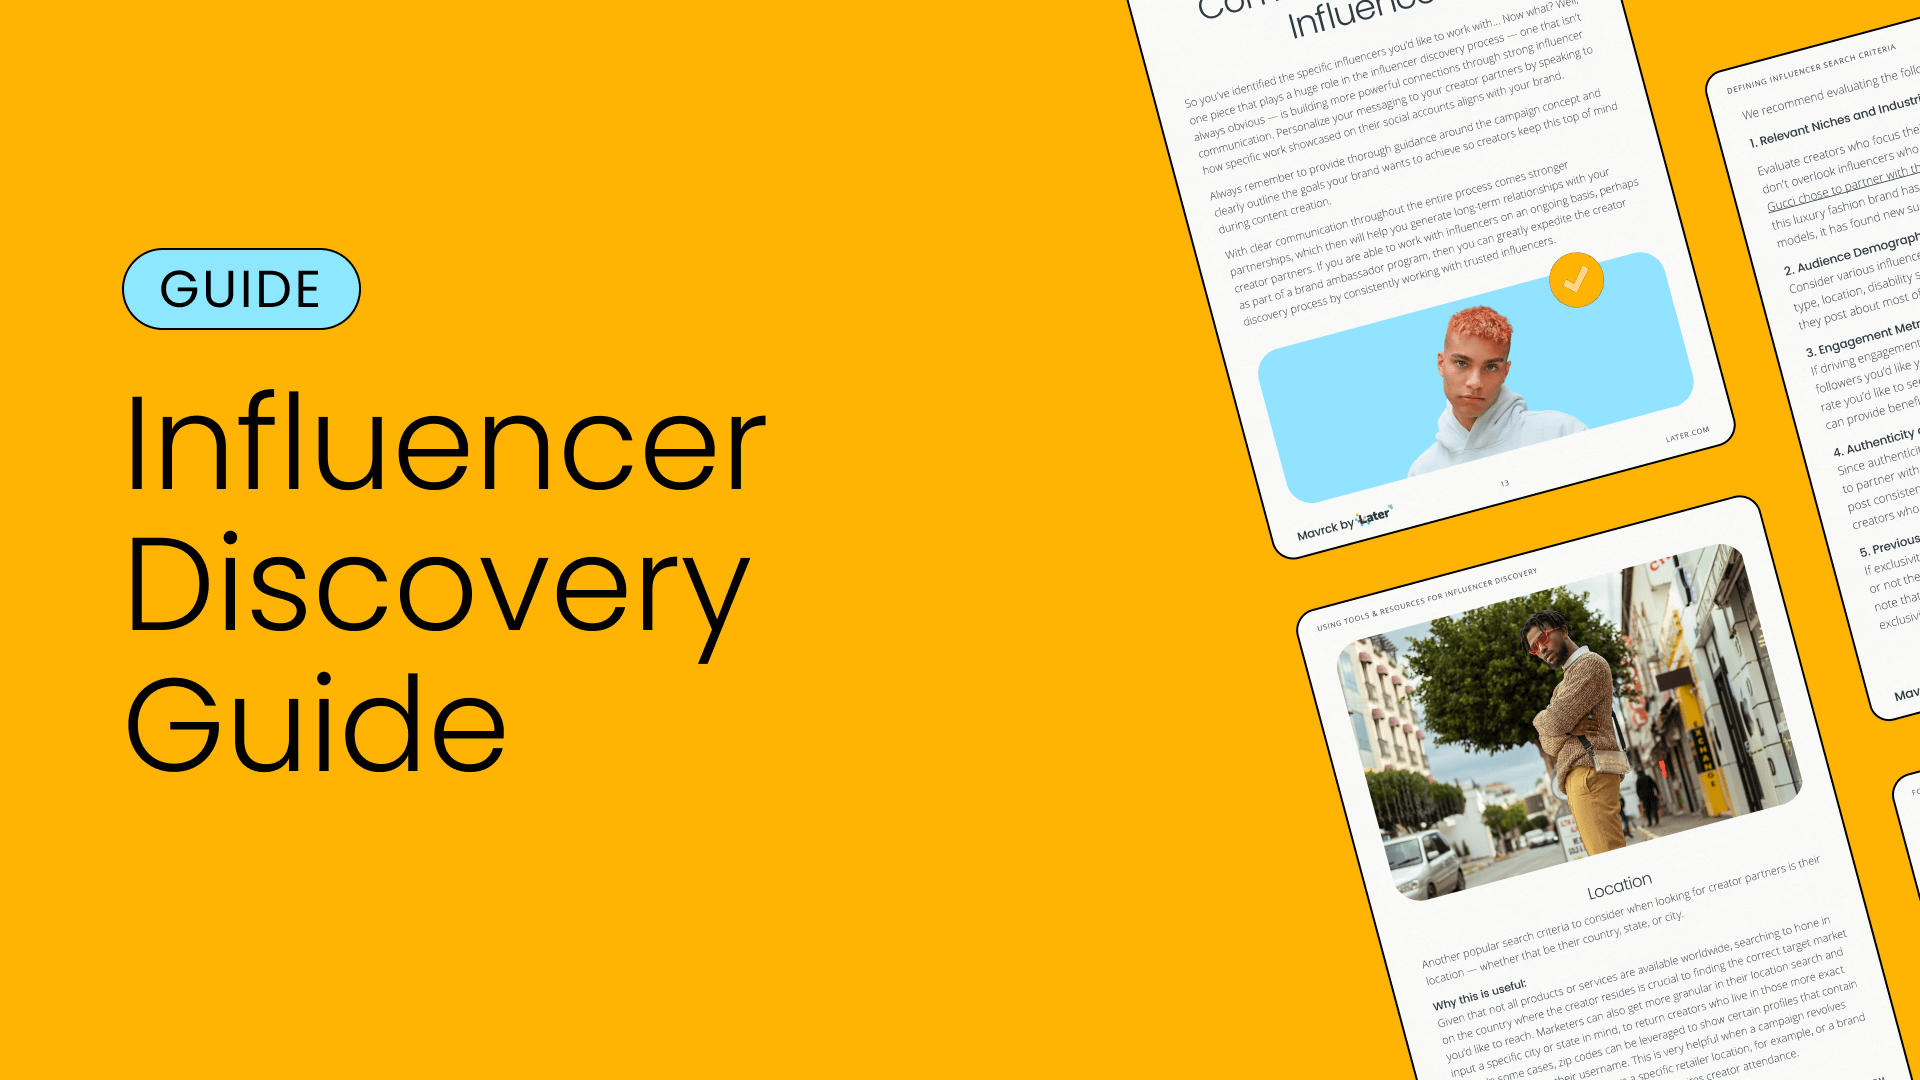 Free influencer discovery guide for brand marketers from Later.